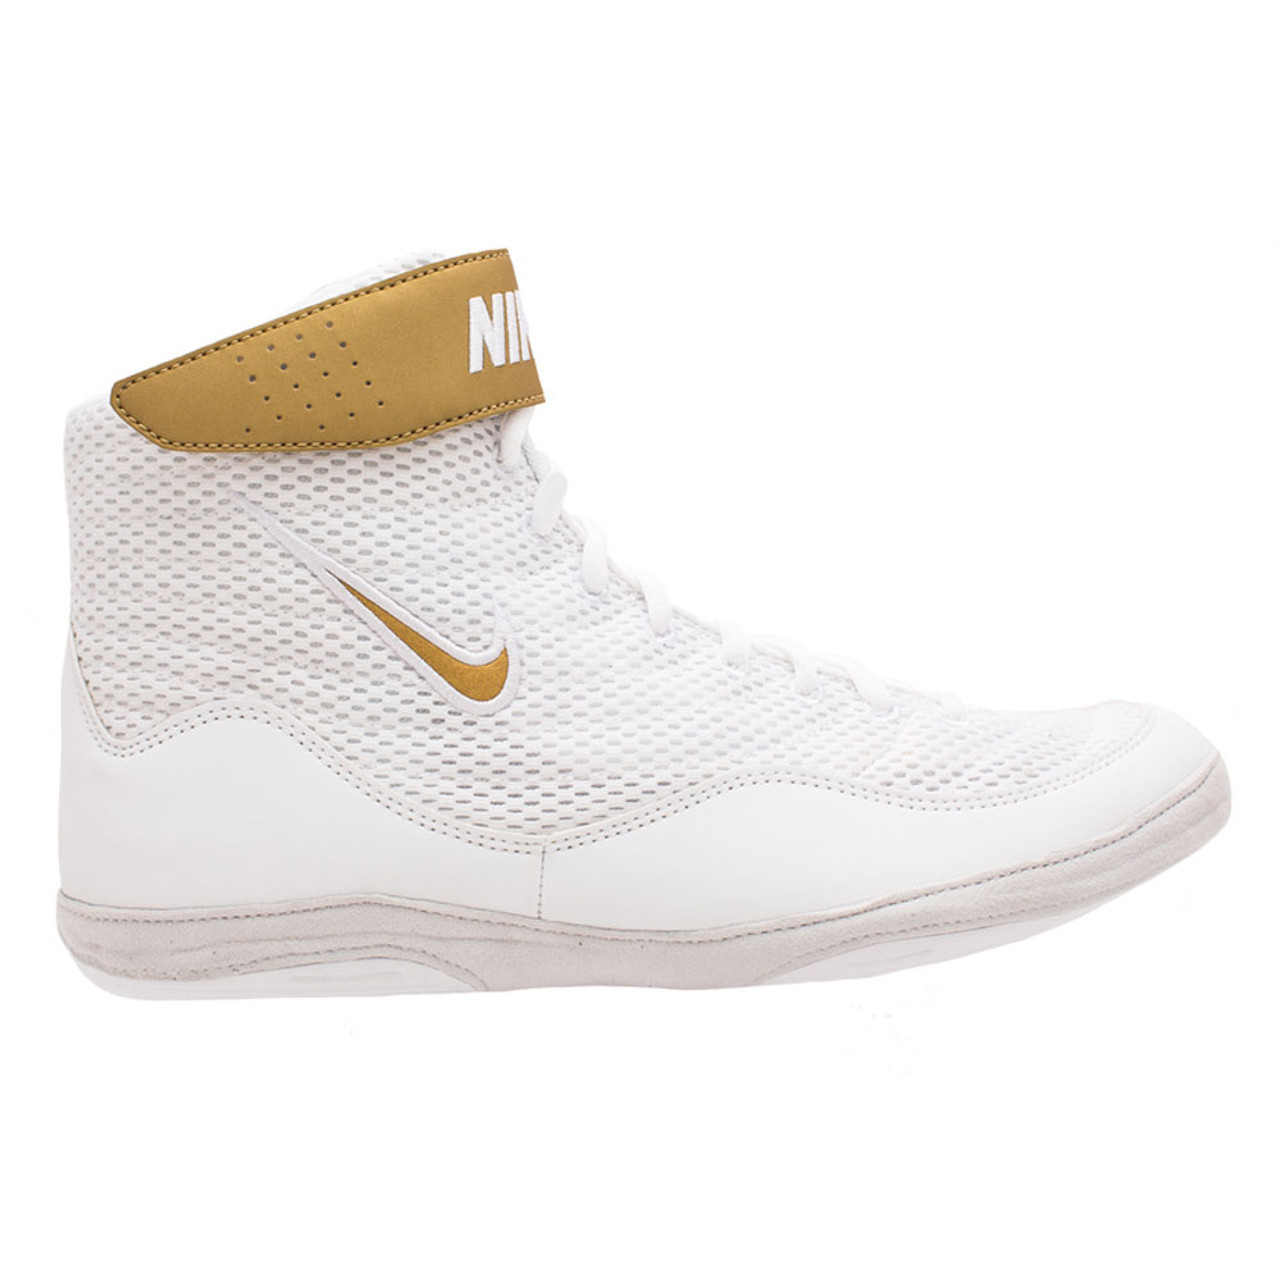 Nike Inflict 3 Limited Edition (Multiple Colors) - Athlete Performance ...